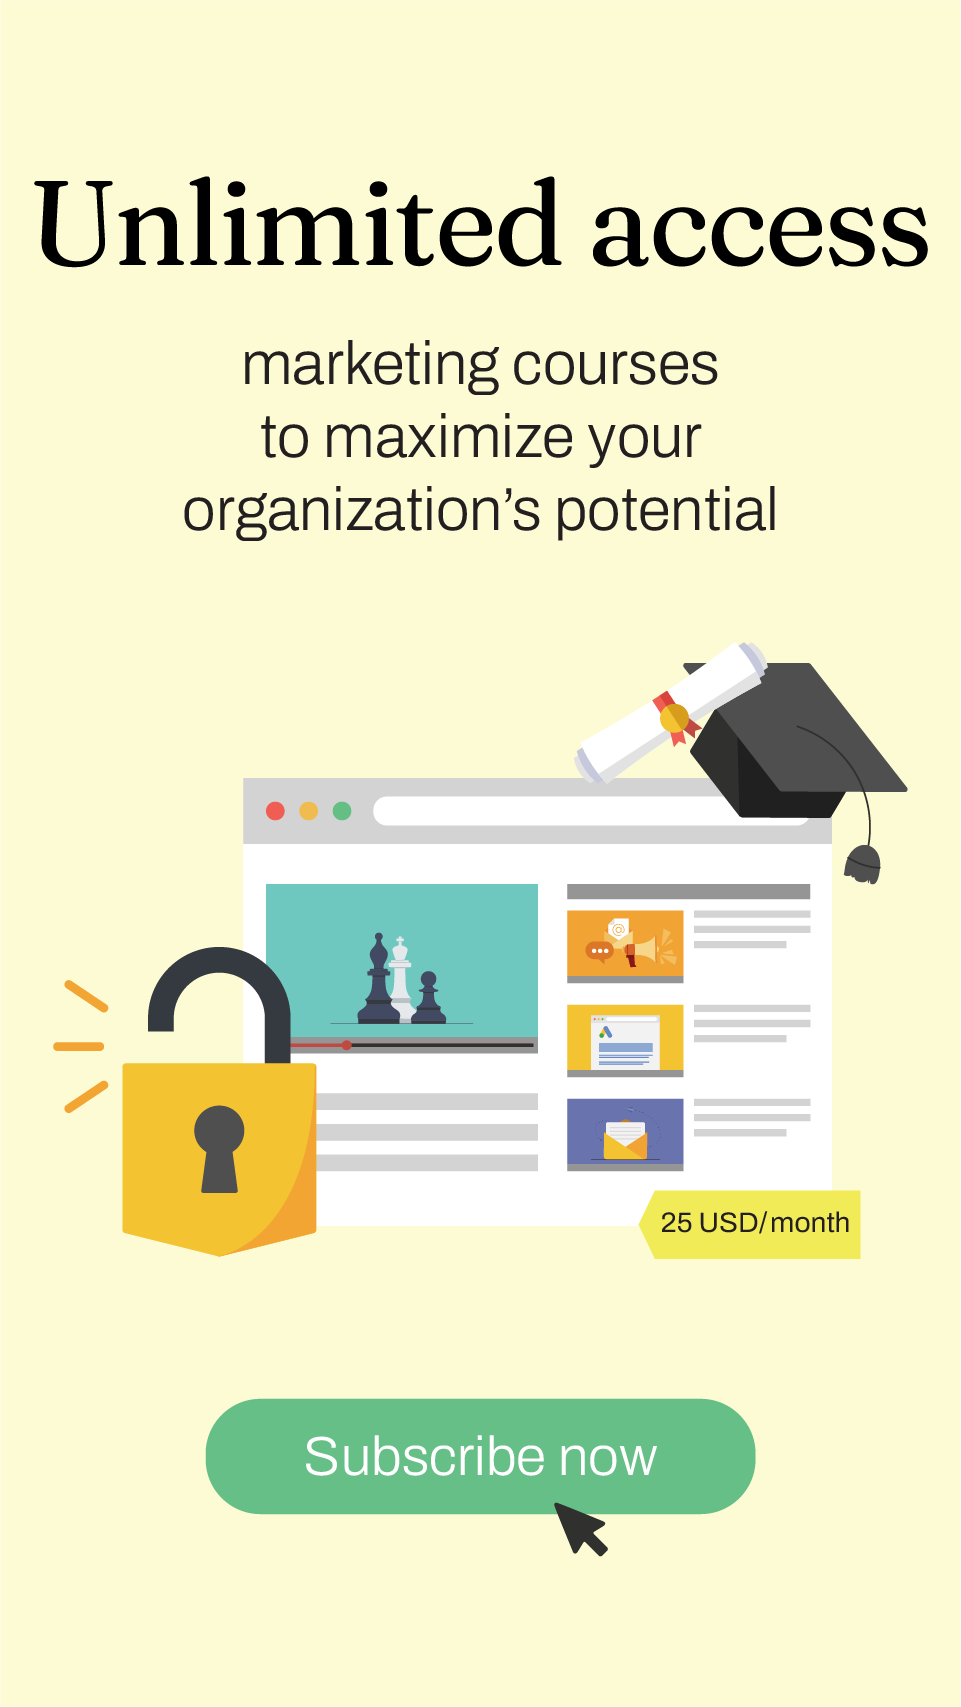 Unlimited access marketing courses to maximise your organization's potential-Marketpedia